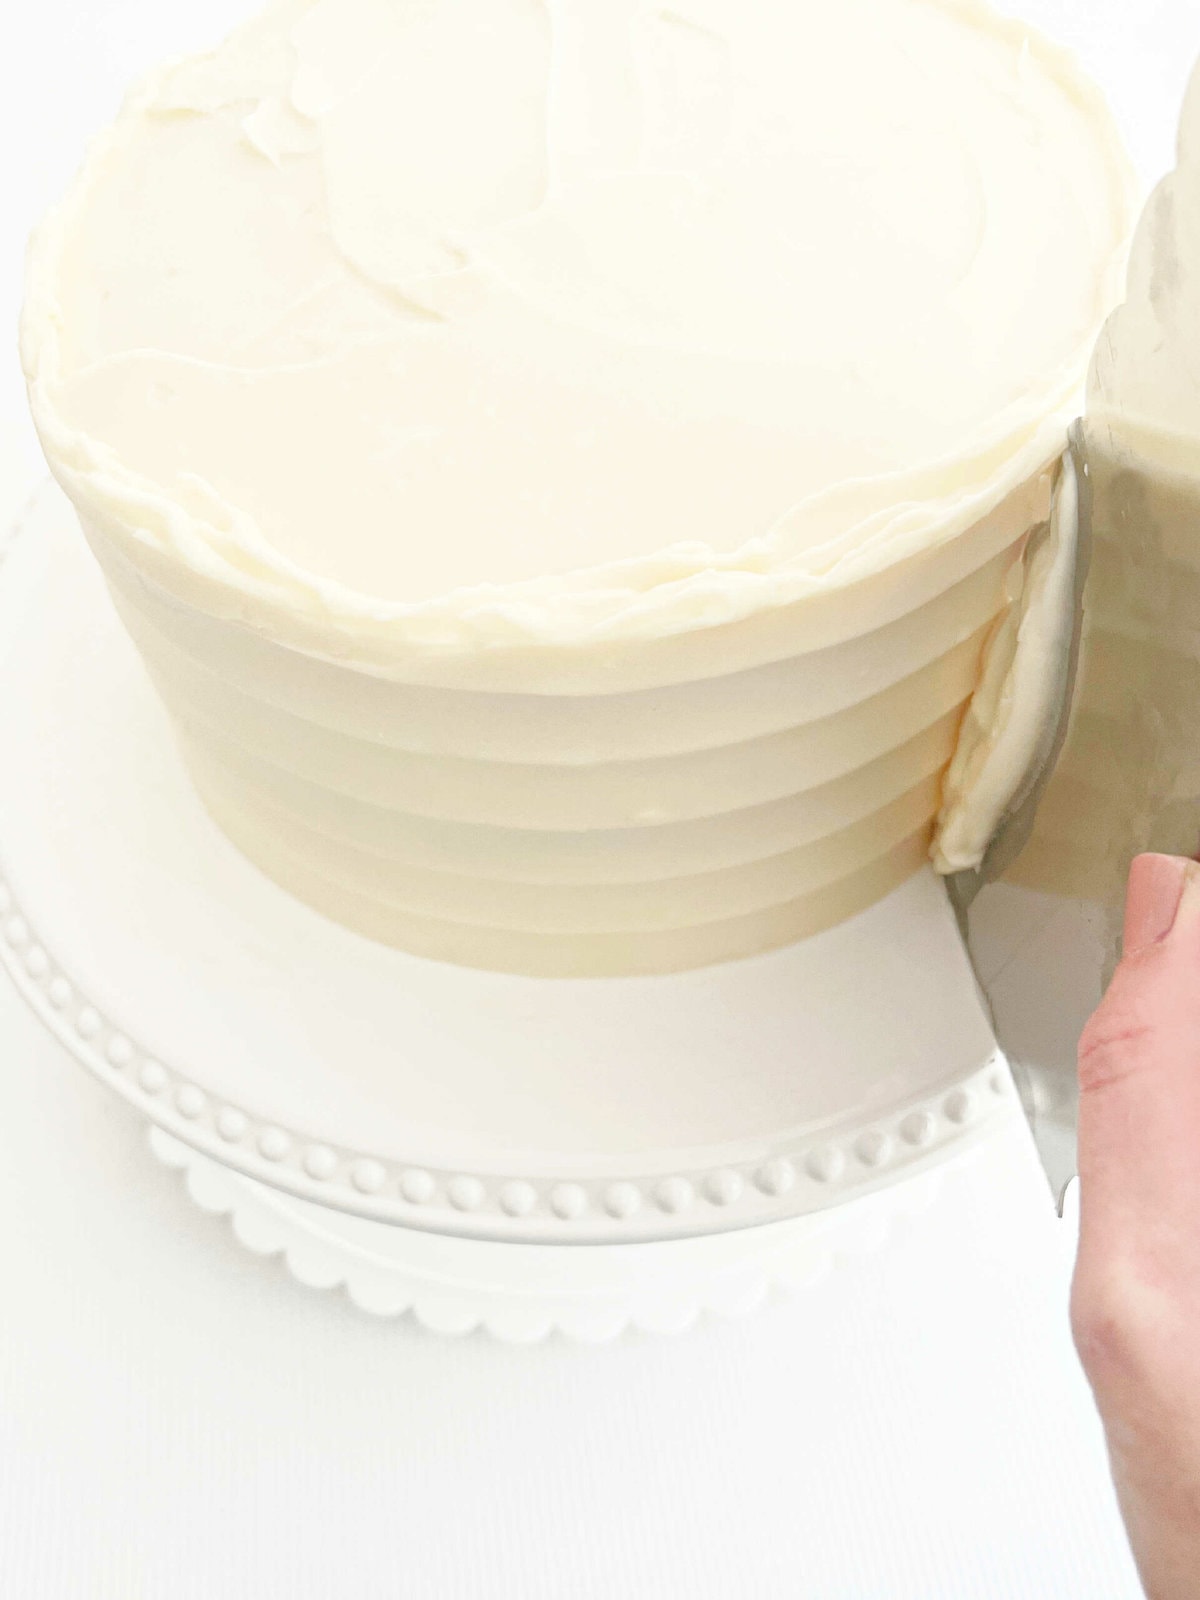 Combing the frosted cake with a cake comb